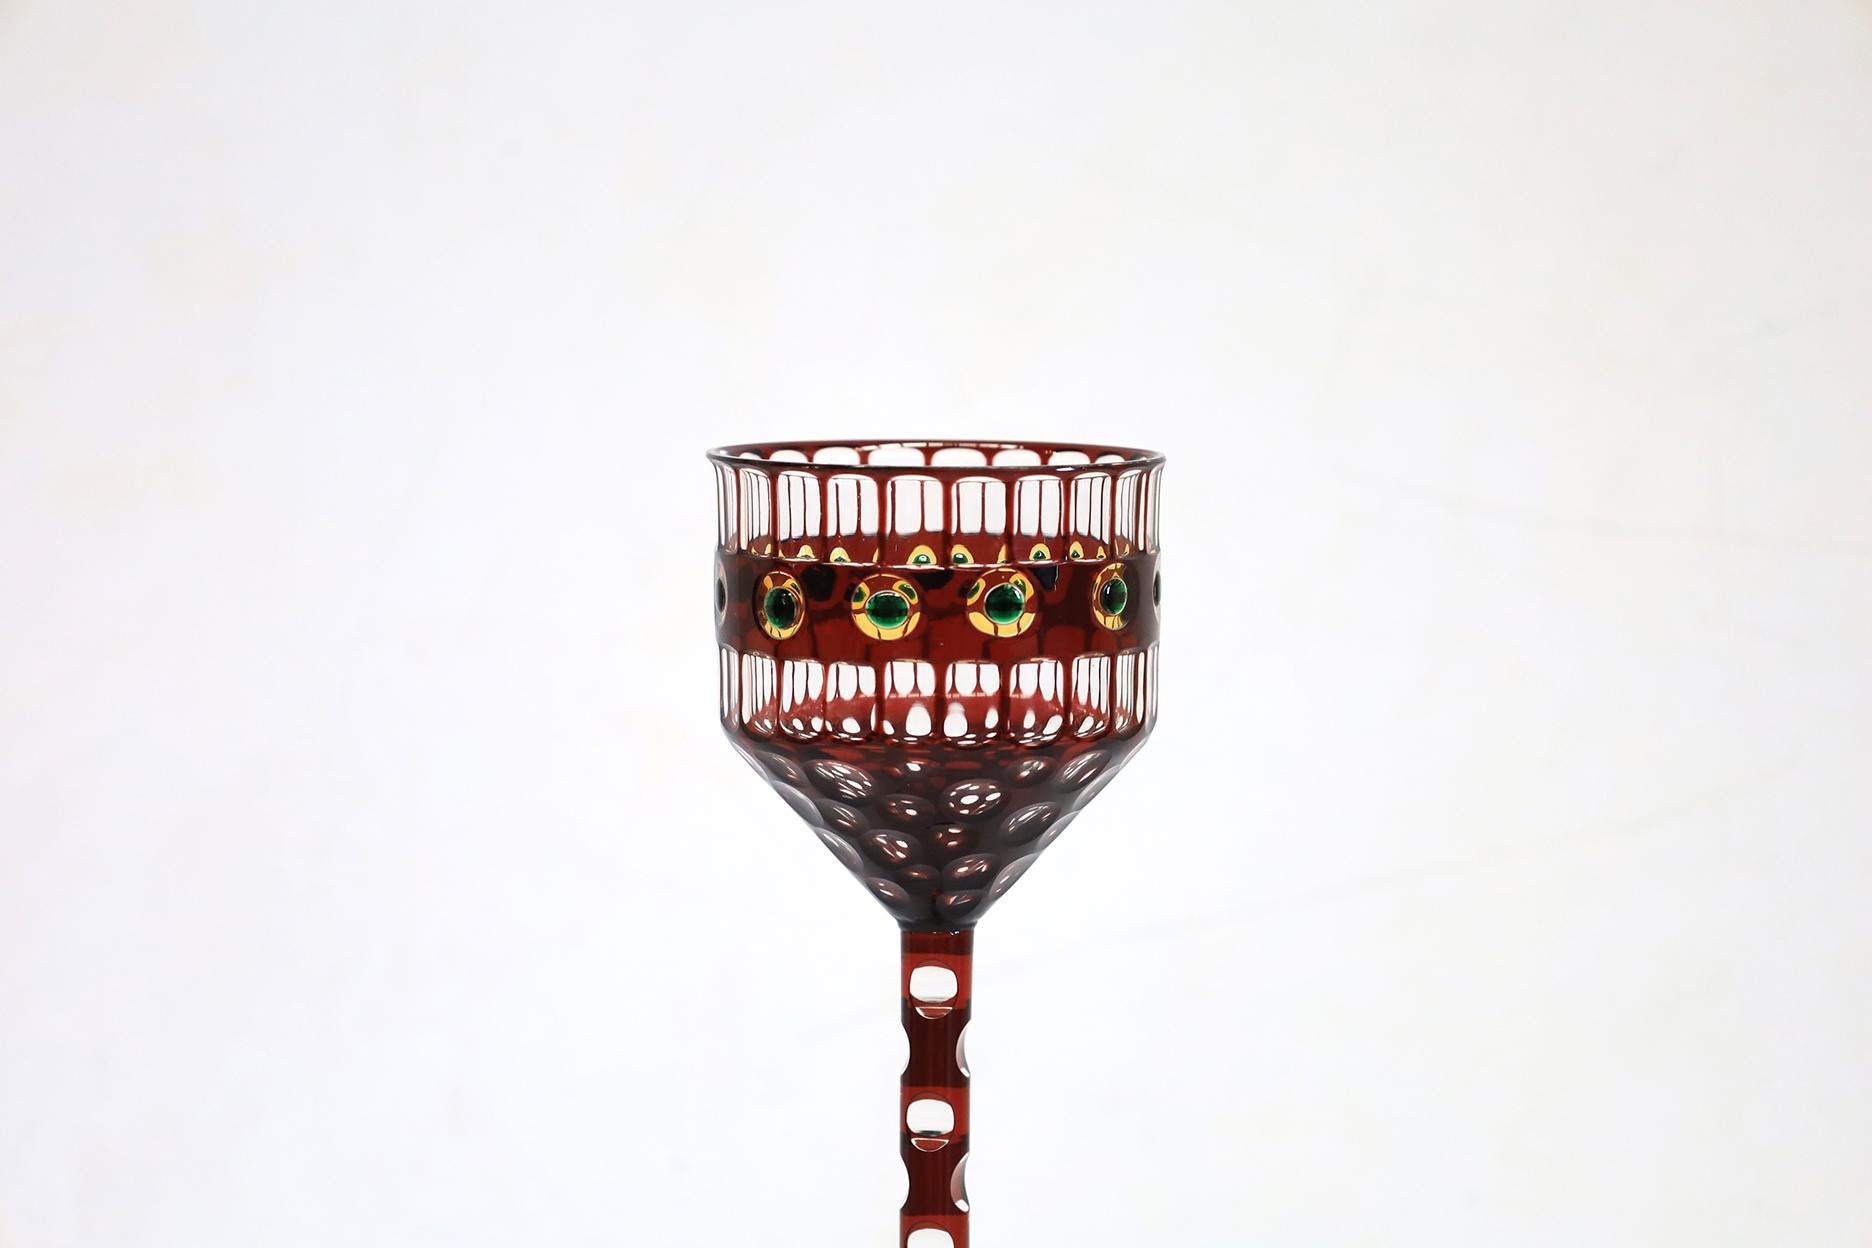 Extraordinary collectible Drinking Glass in perfect condition attributed to Otto Prutscher.
Manufactured in 1906 by Meyr's Neffe in Vienna Austria.
This design is now in the permanent collection of the  Museum of Applied Arts in Austria among other